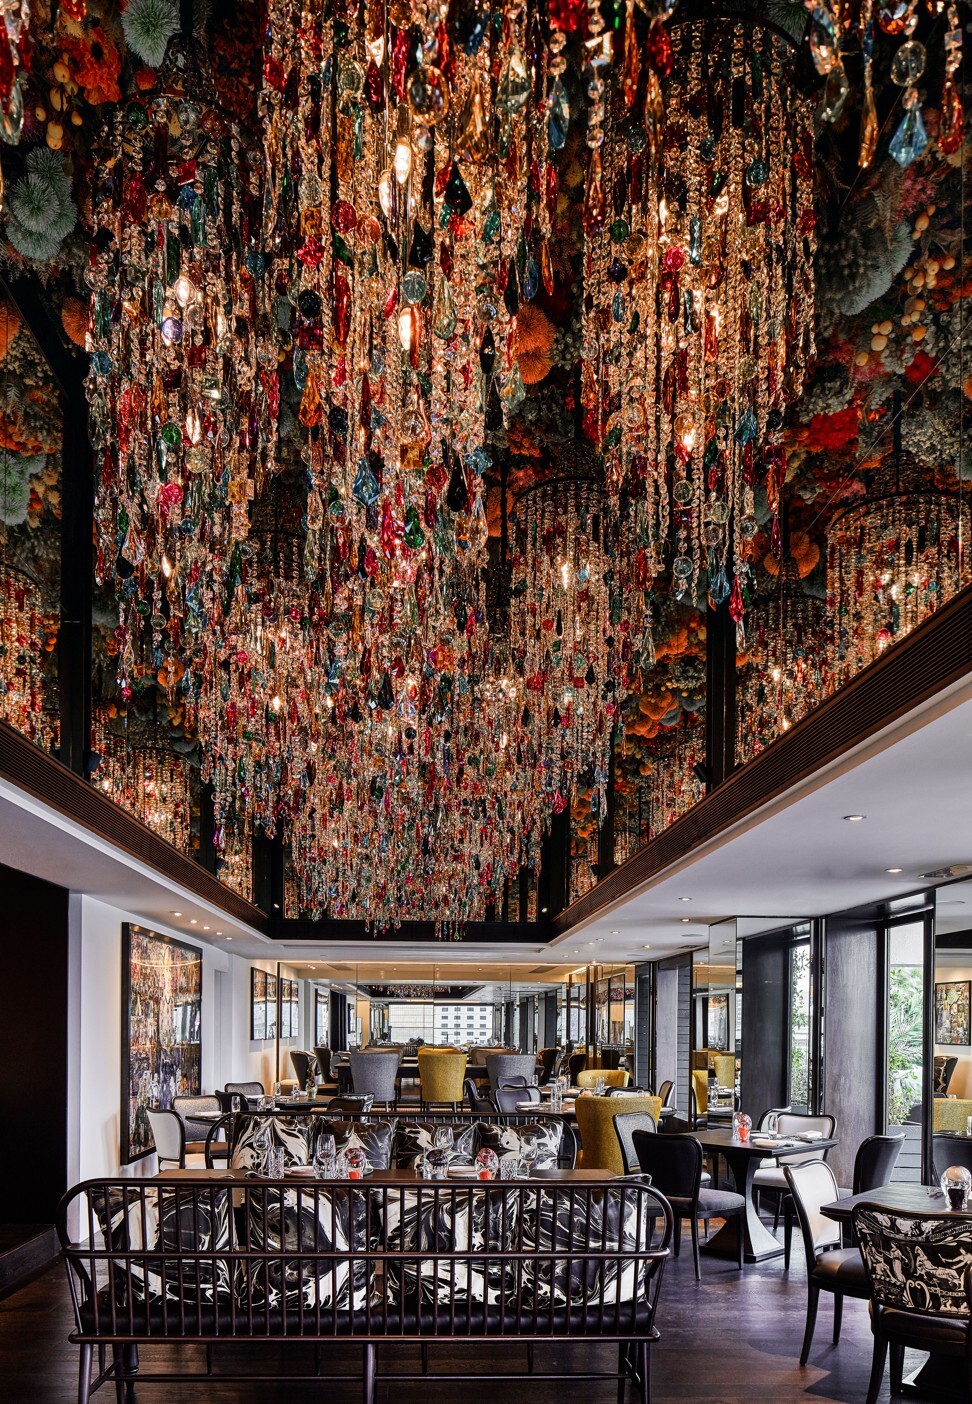 The ceiling installation consists of 100,000 silk flowers and 36 custom-made gypsy chandeliers with more than 76,000 handcrafted crystals.